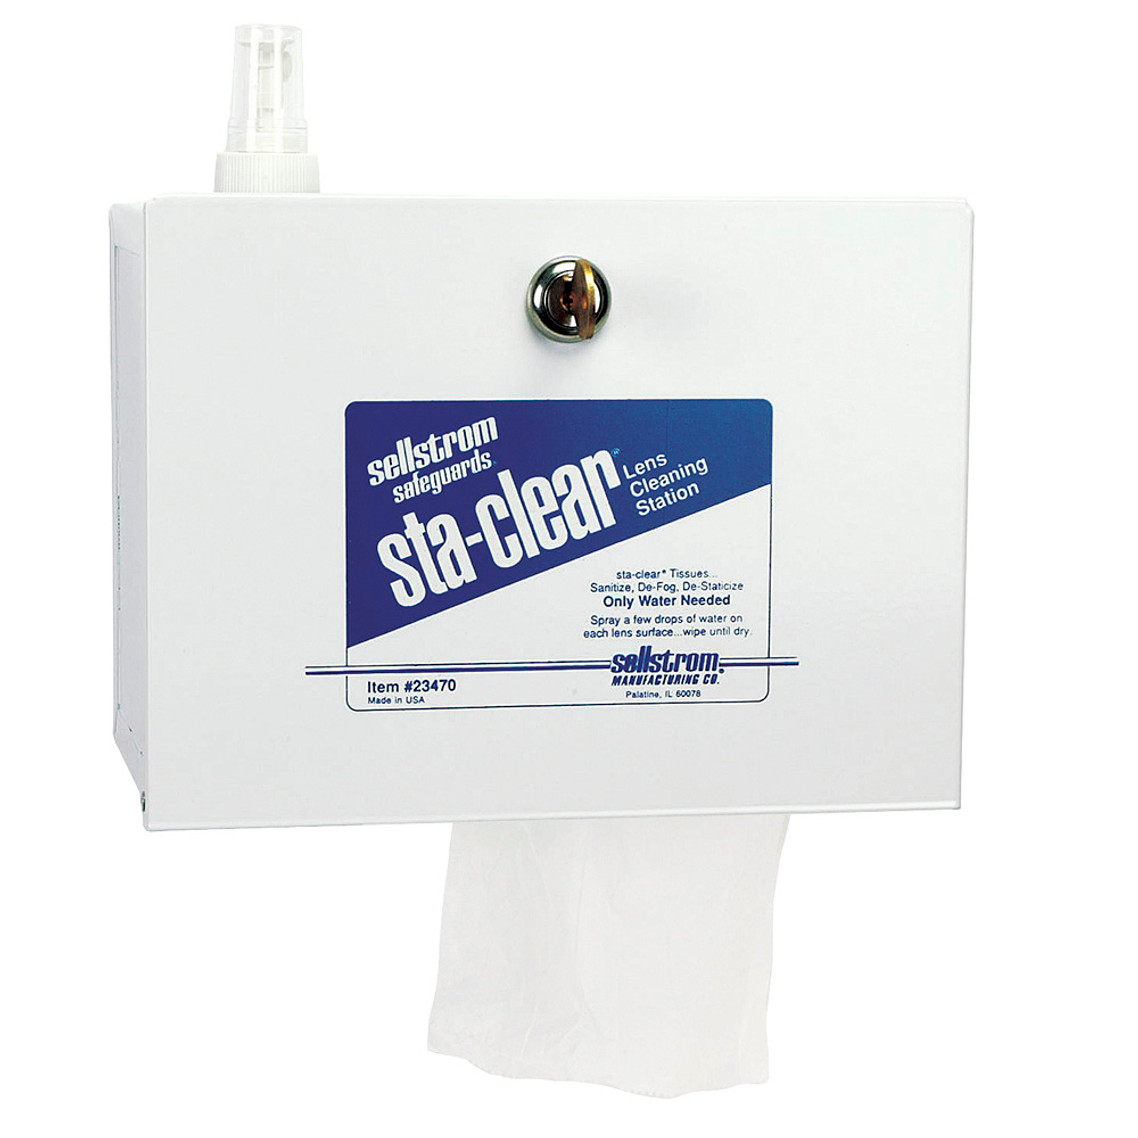 S23470 Metal Station (1,000 Tissues And Spray Bottle) 